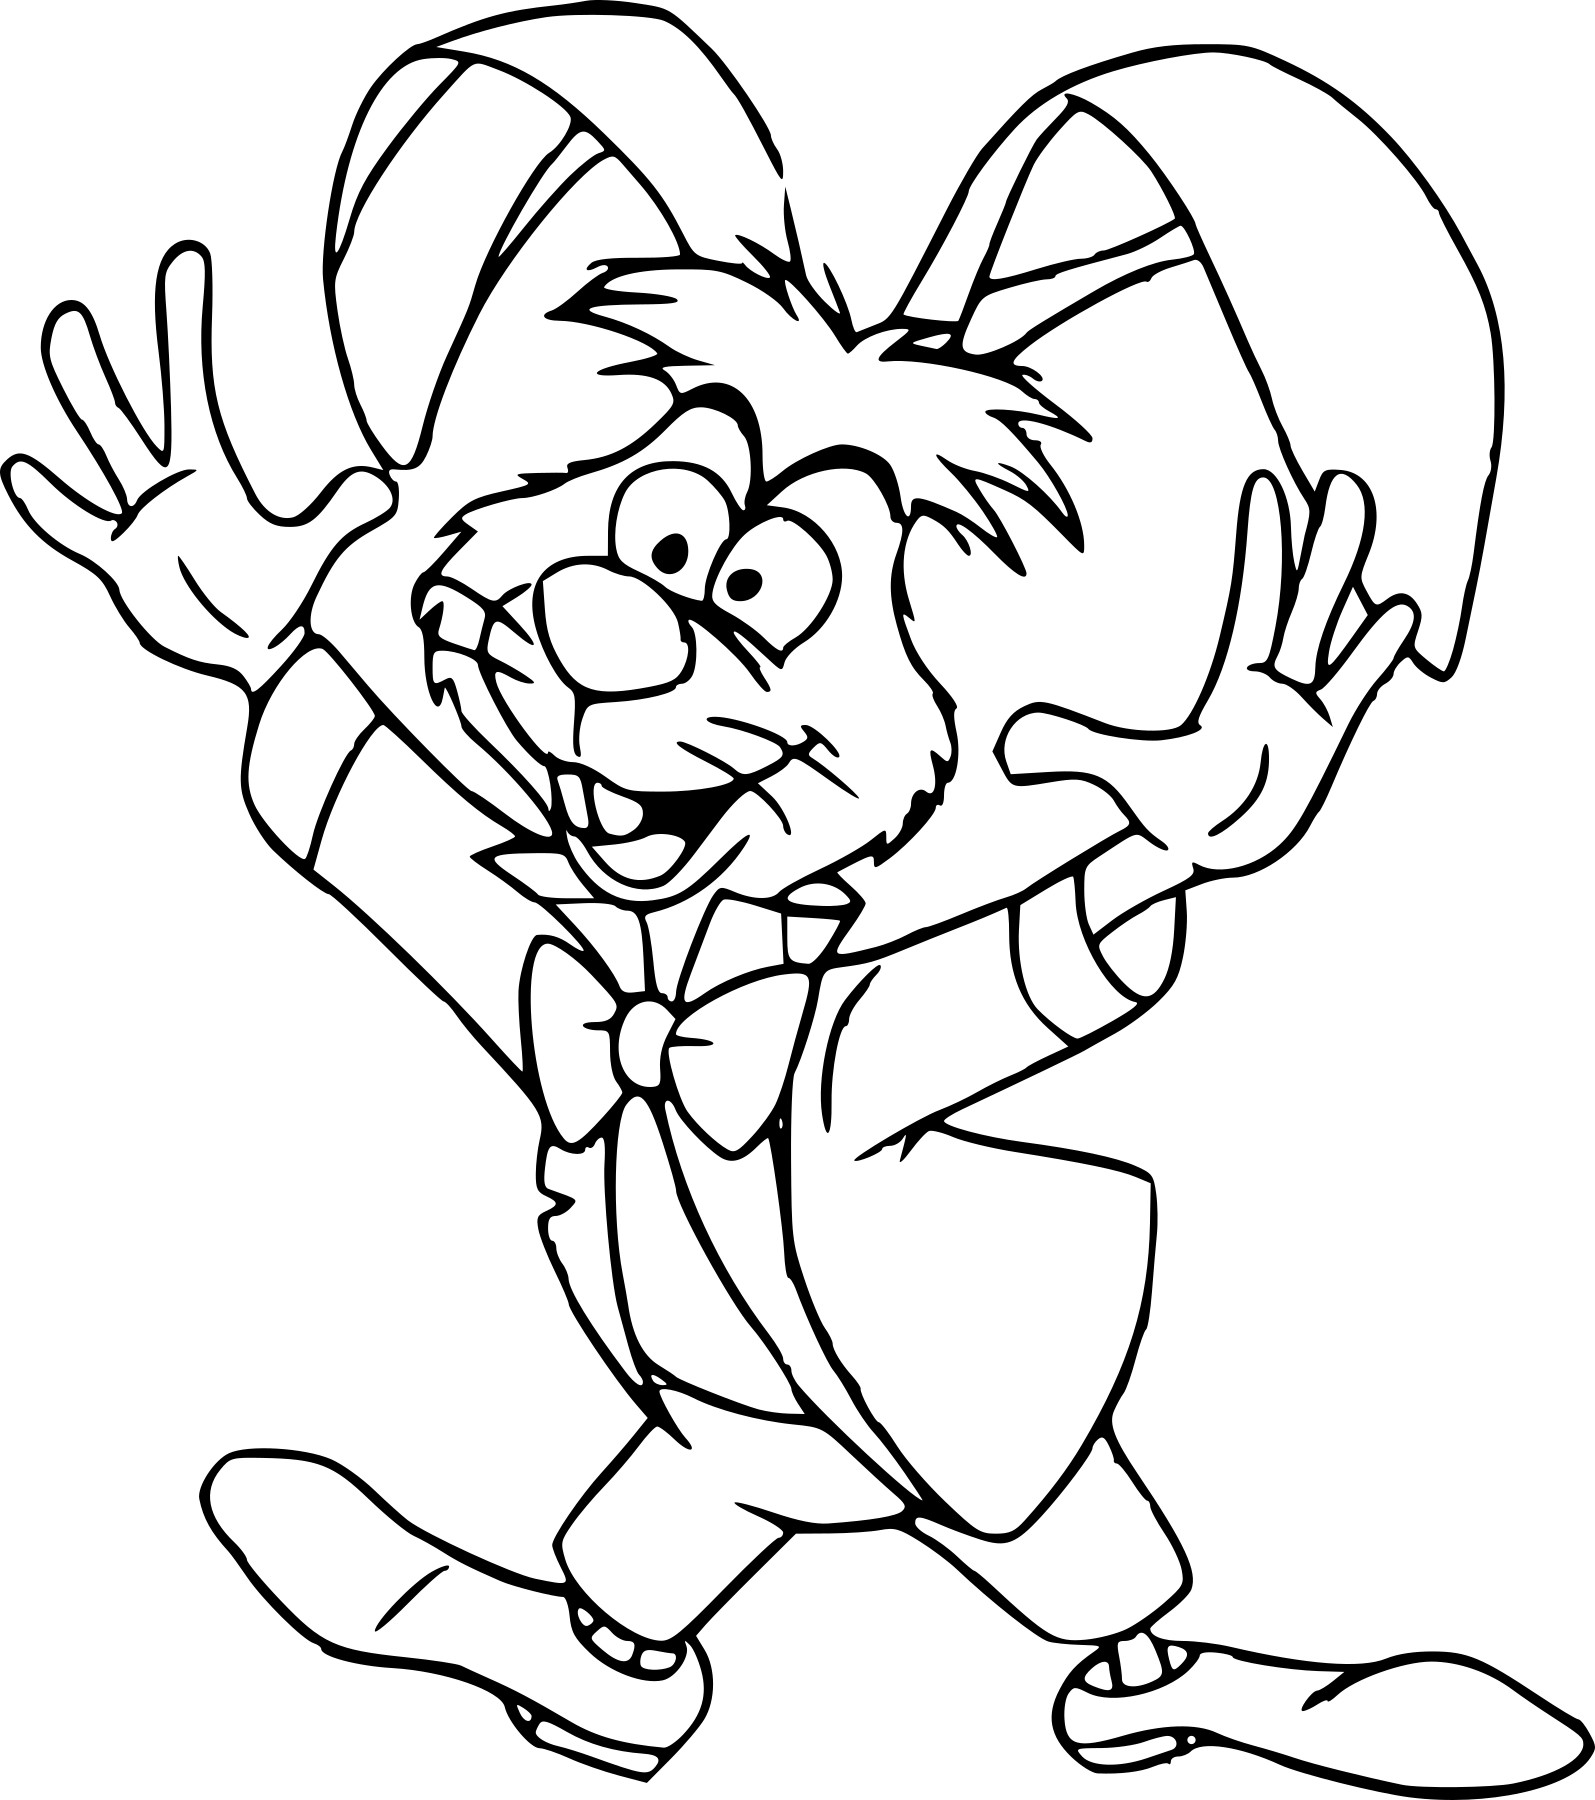 March Hare Disney coloring page